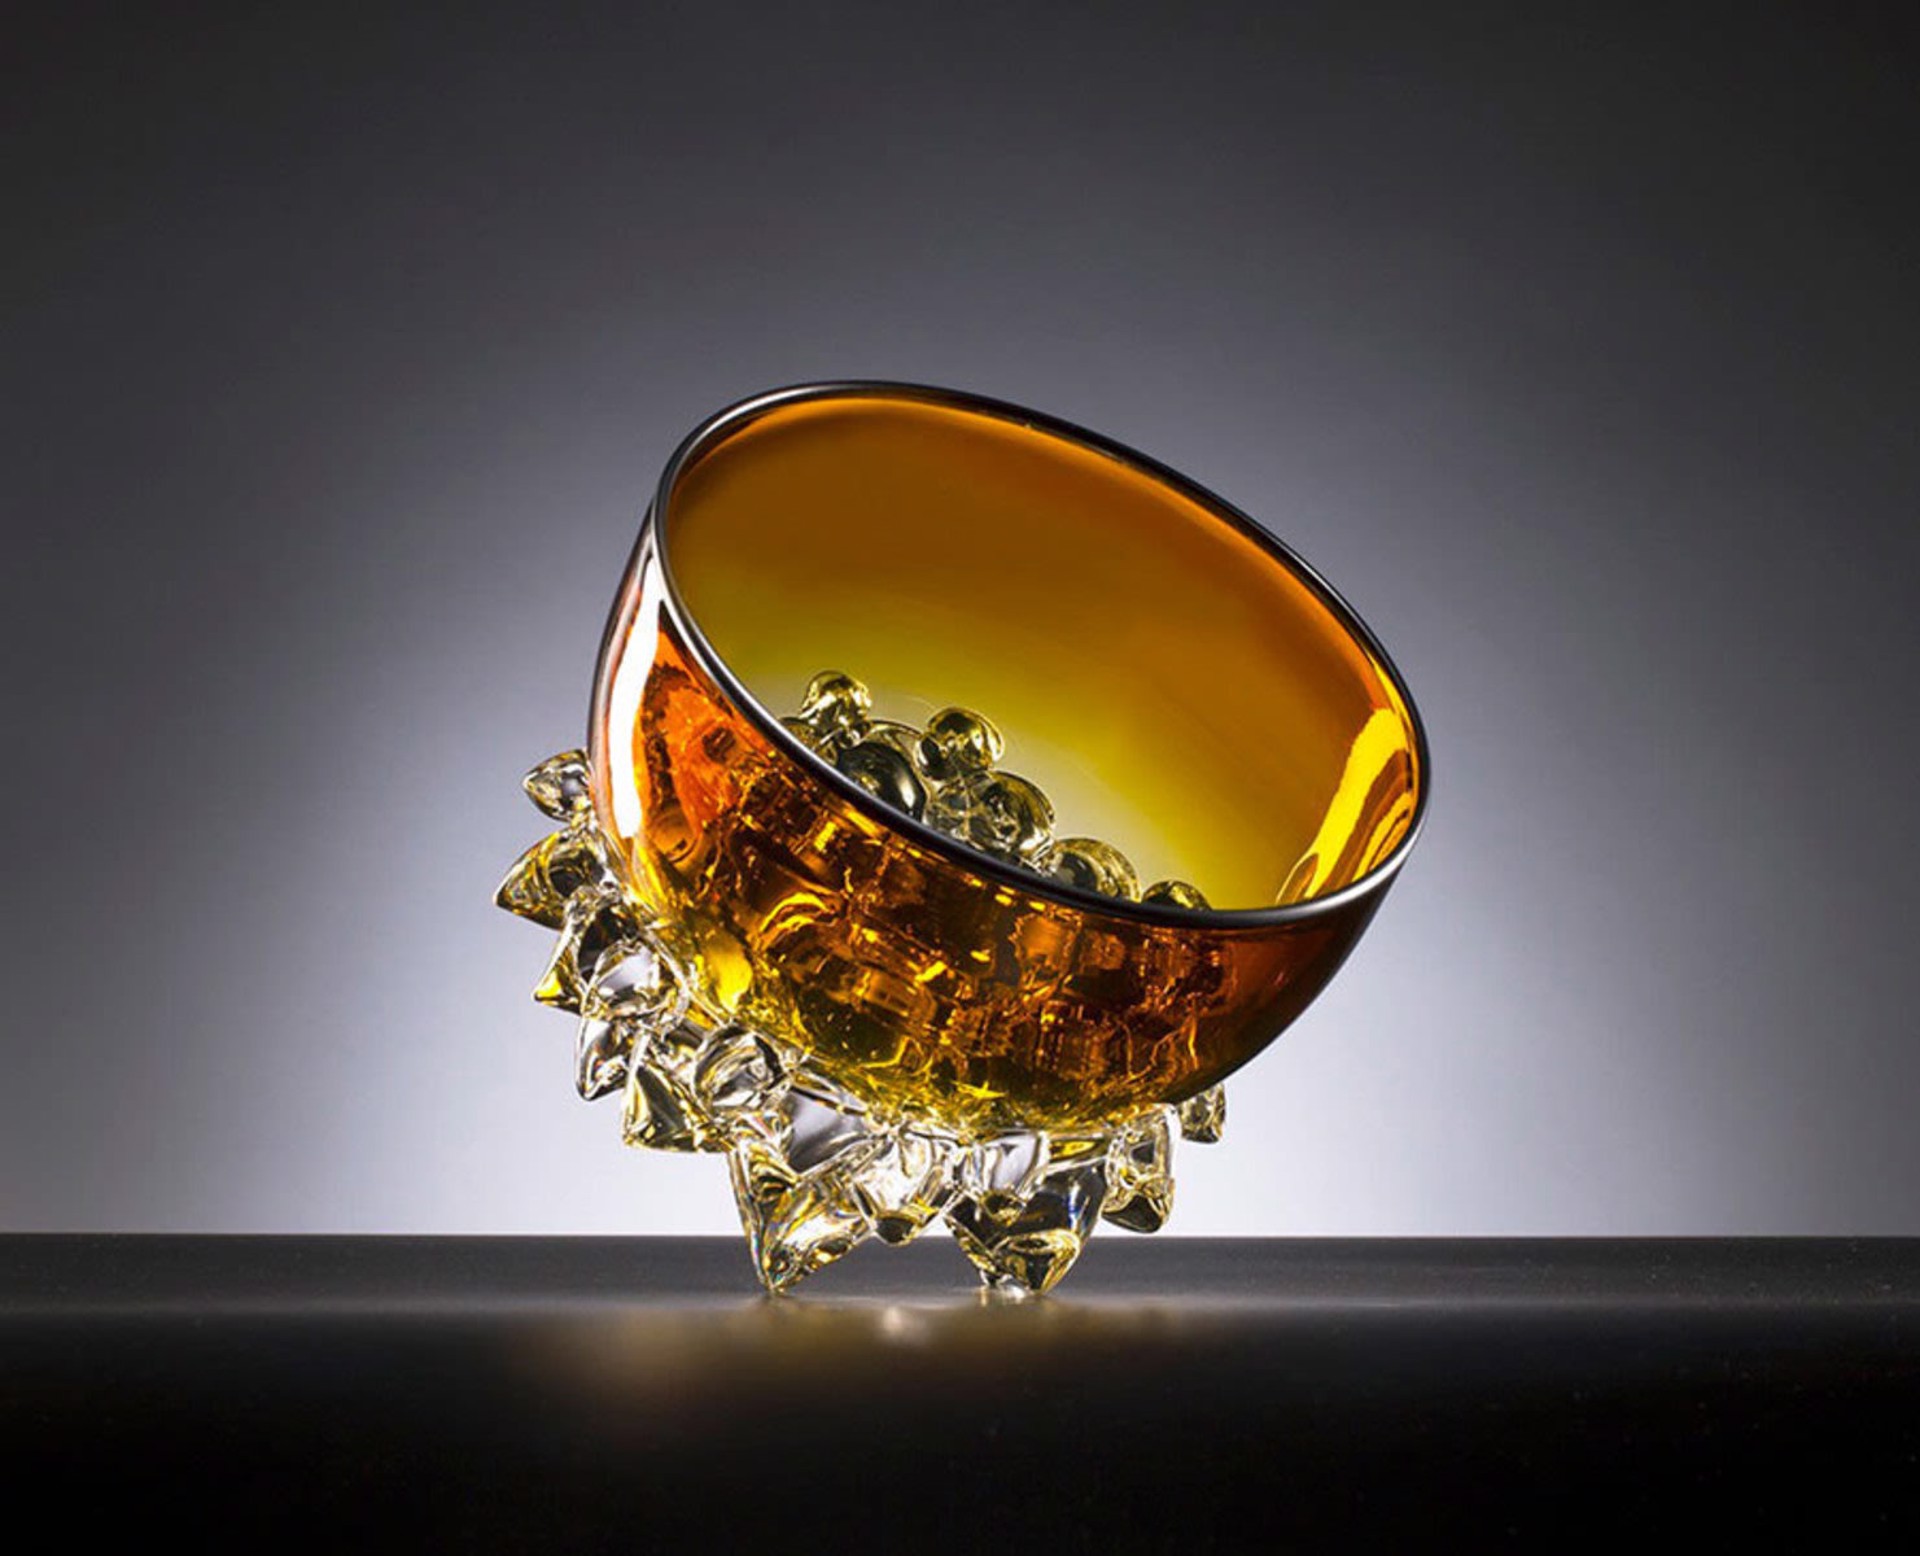 Thorn Vessel Gold Topaz 9" by Andrew Madvin